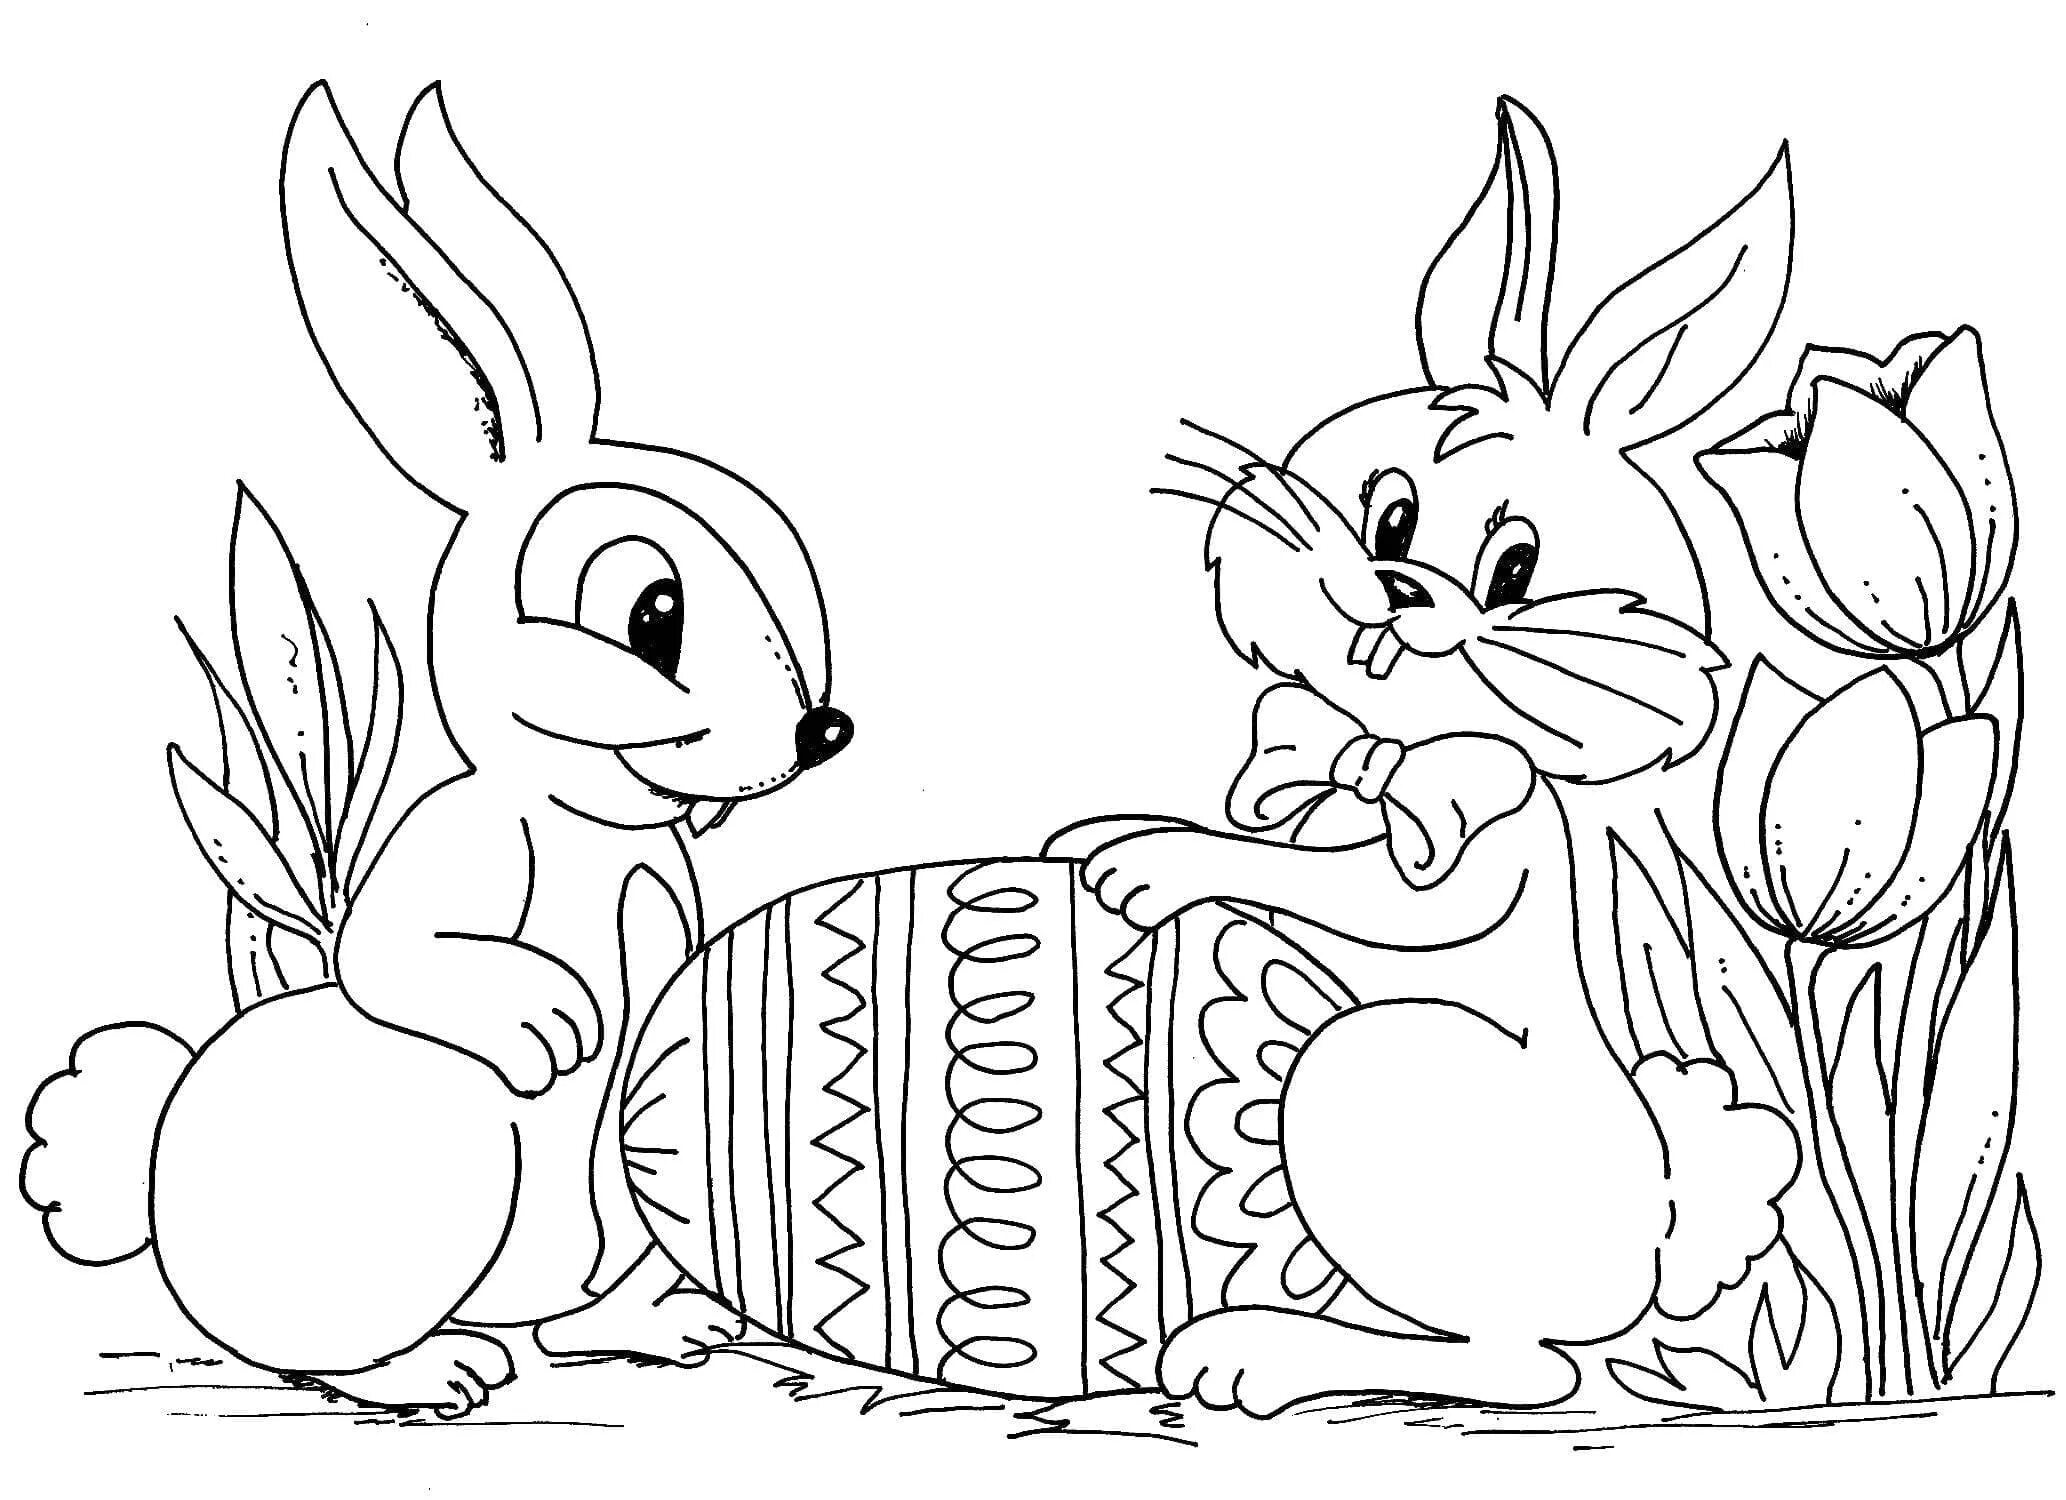 Great coloring hare and squirrel